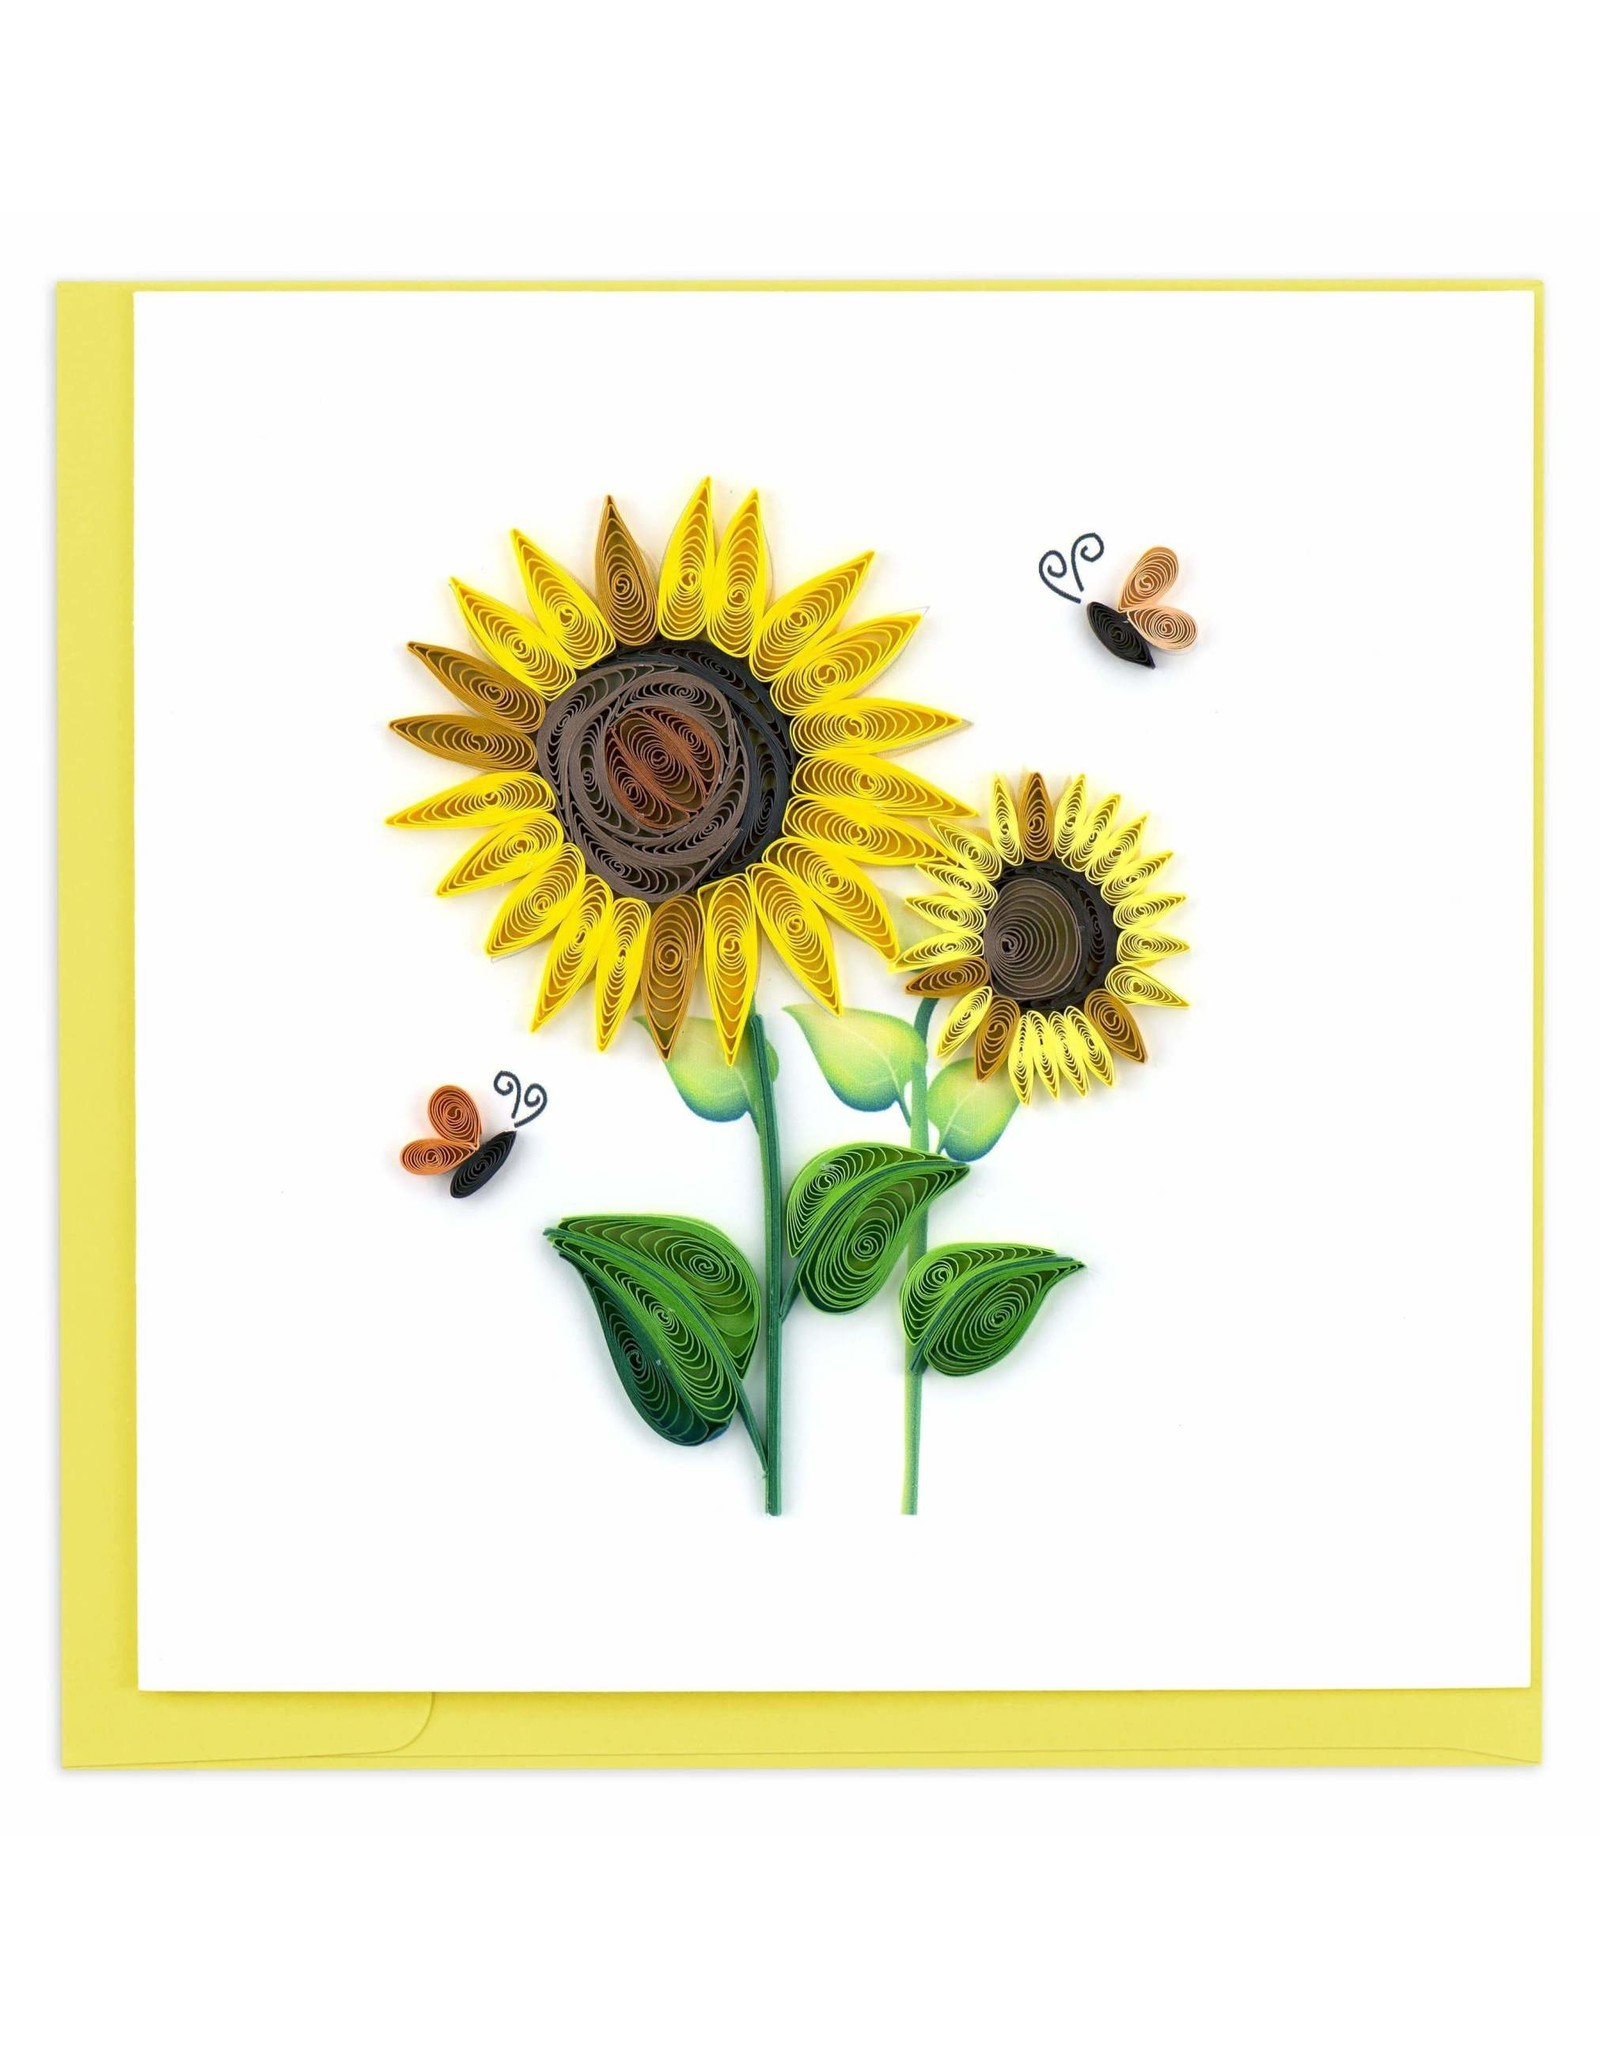 Quilling Card Quilled Sunflower Greeting Card